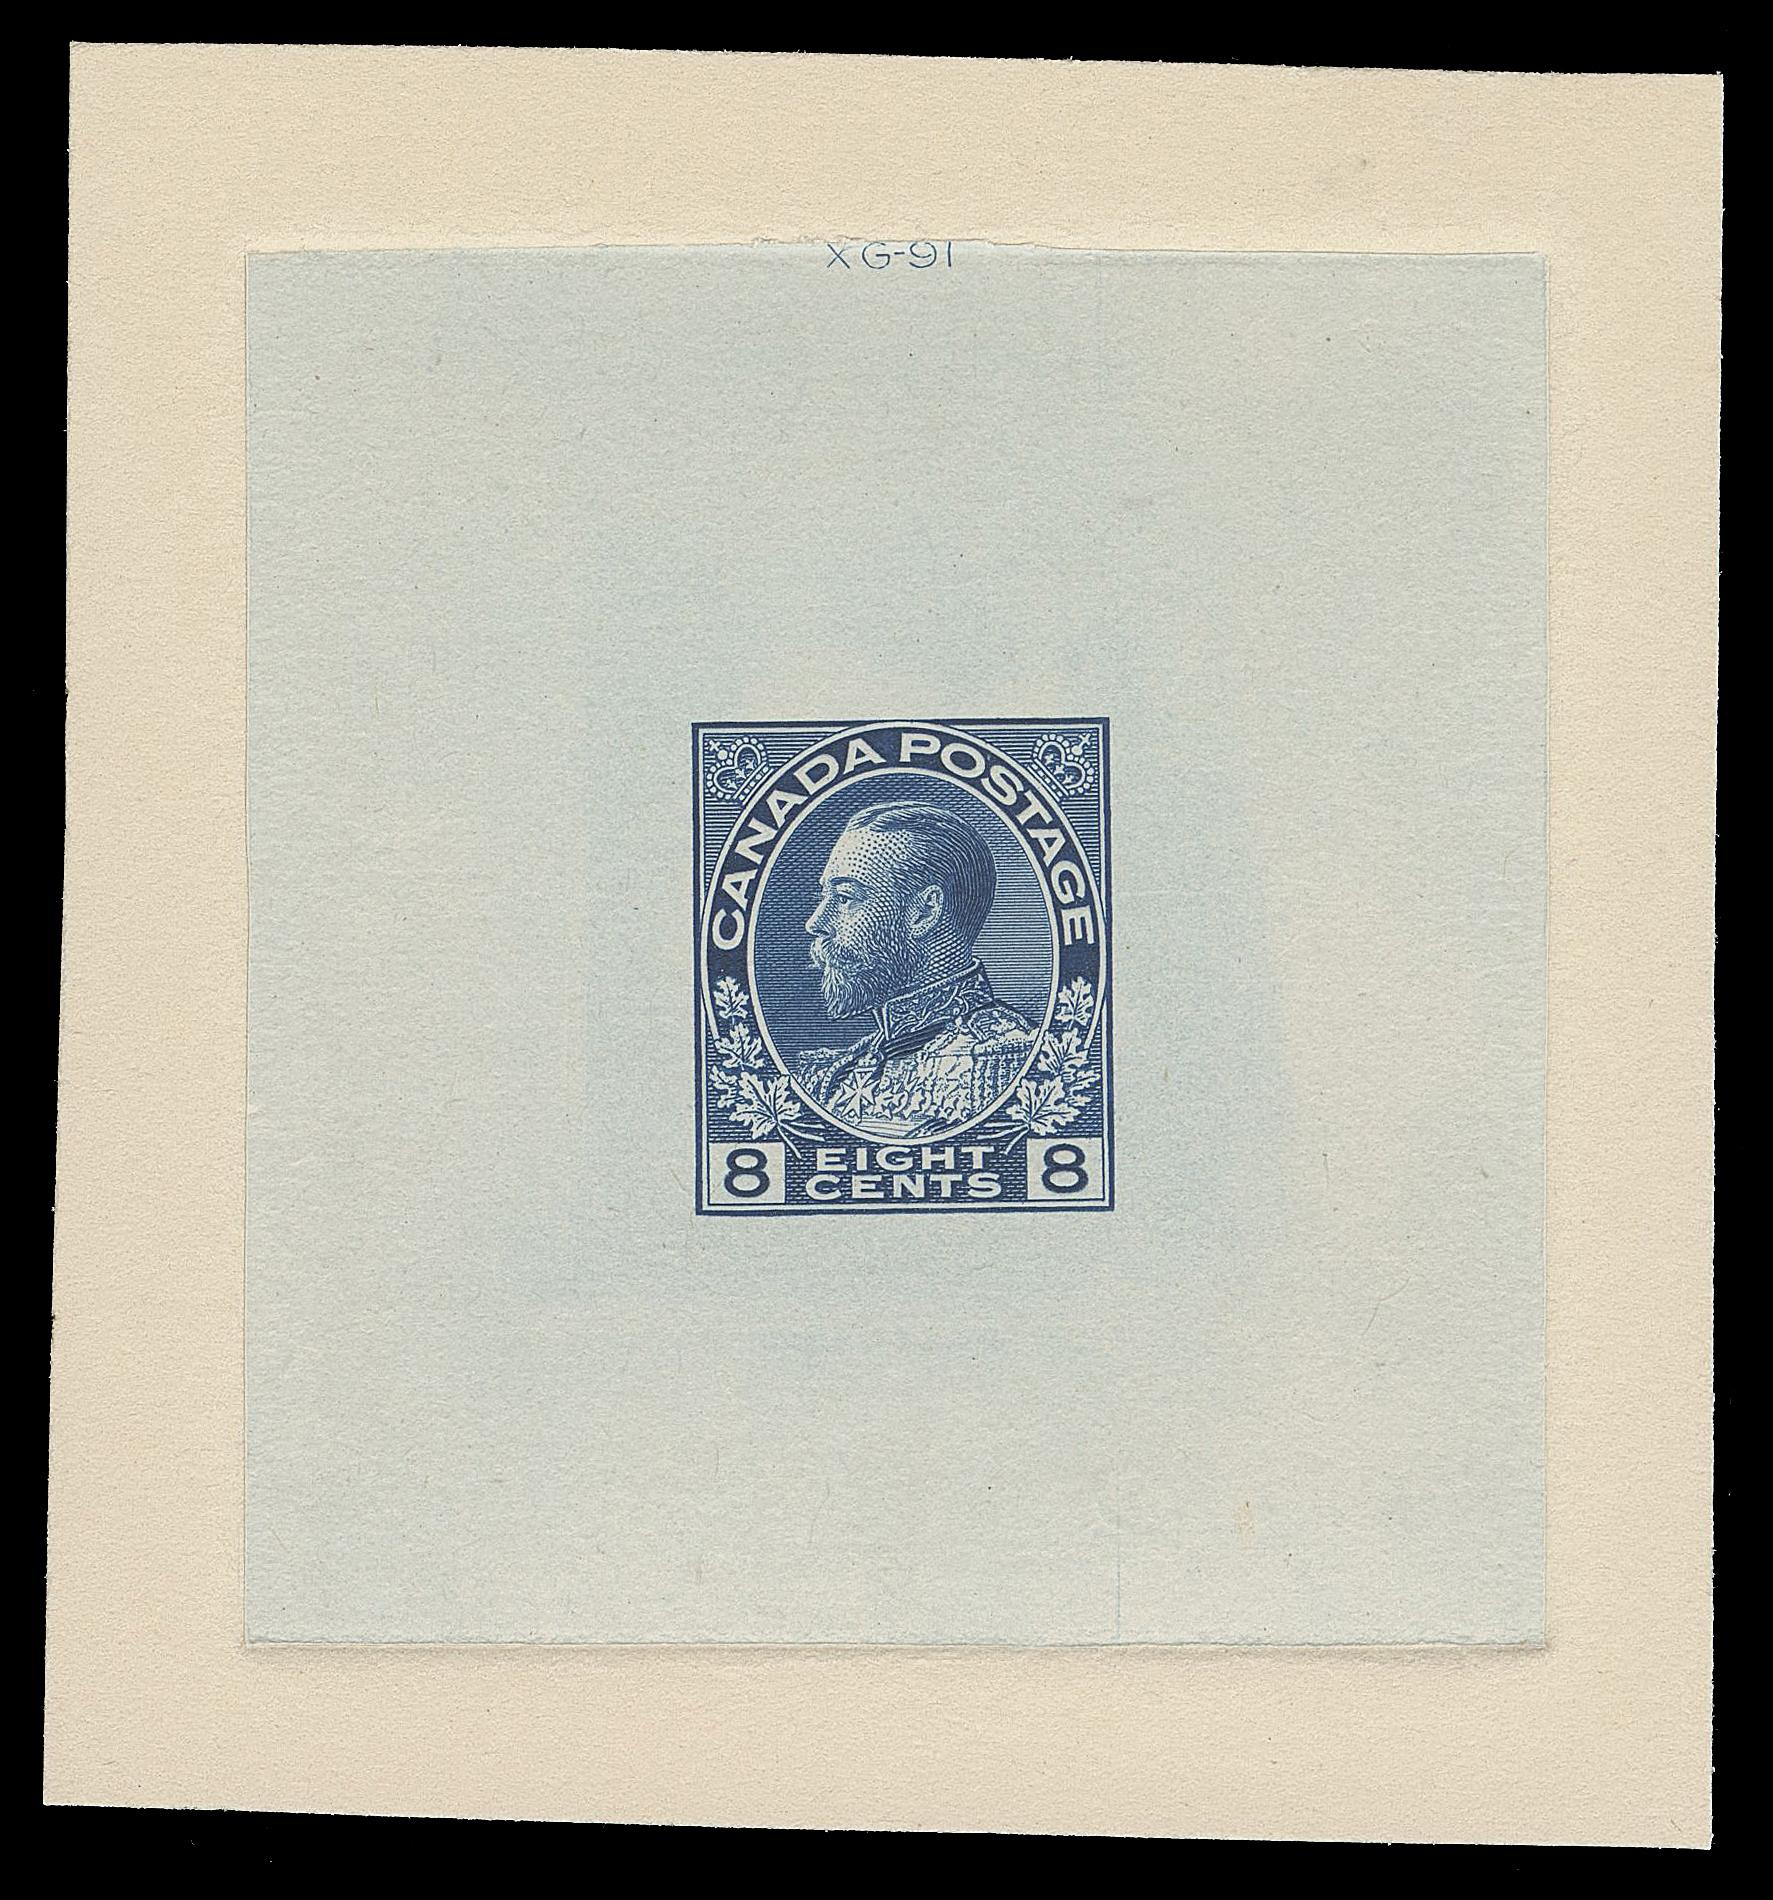 ADMIRAL PROOFS  115,Die Proof in issued colour on india paper 55 x 59mm, die sunk on slightly larger card 70 x 75mm; the hardened die showing die number "XG-91 number along edge of die sinkage at top; a beautiful and choice die proof, XF (Minuse & Pratt 115P1a)